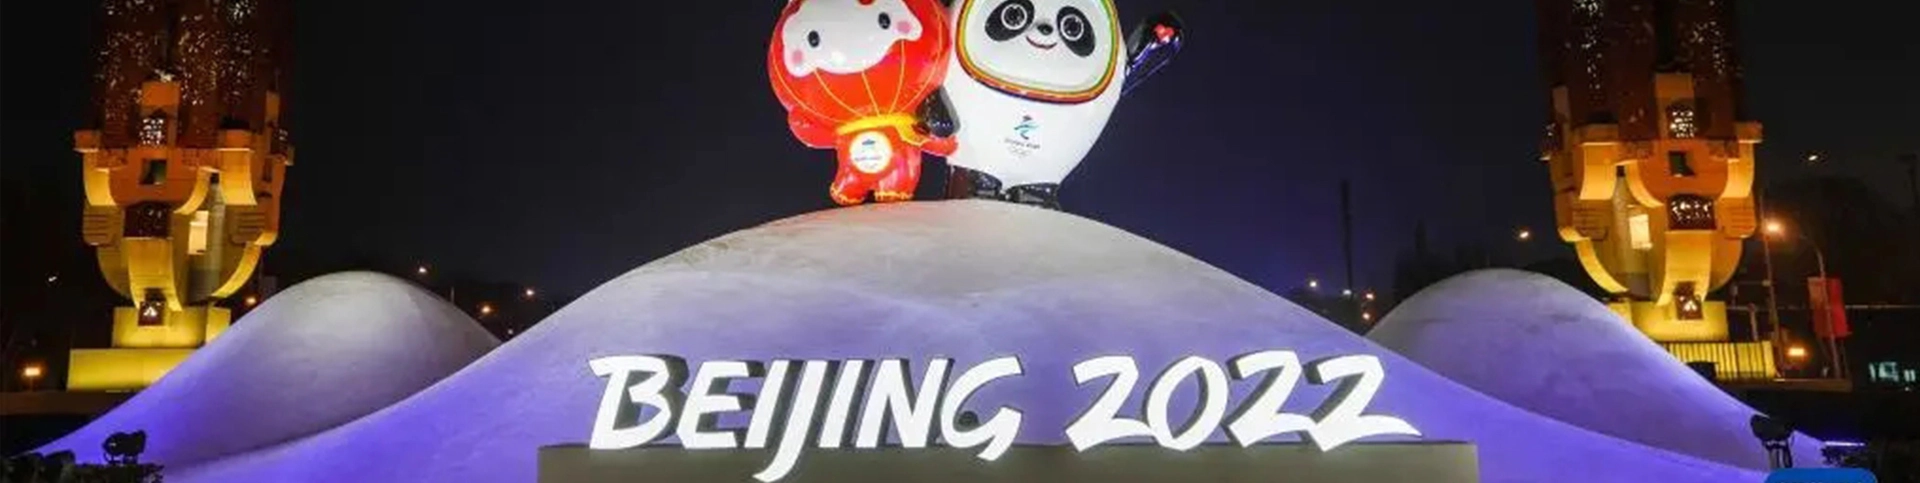 The Best Conference System for Beijing 2022 Olympic Winter Games